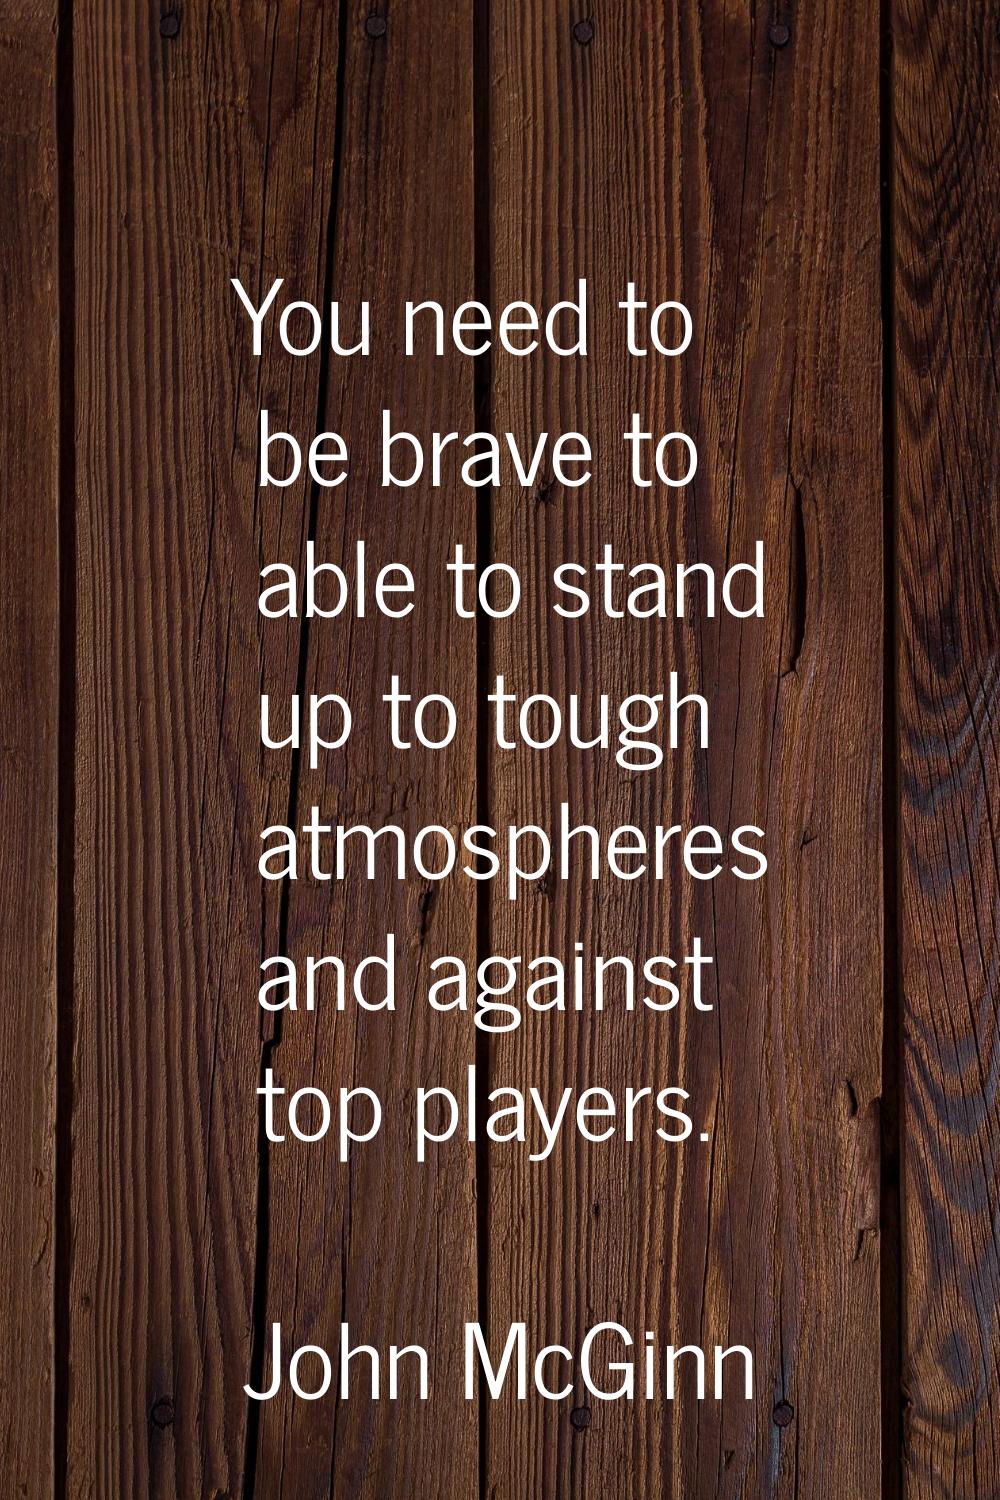 You need to be brave to able to stand up to tough atmospheres and against top players.